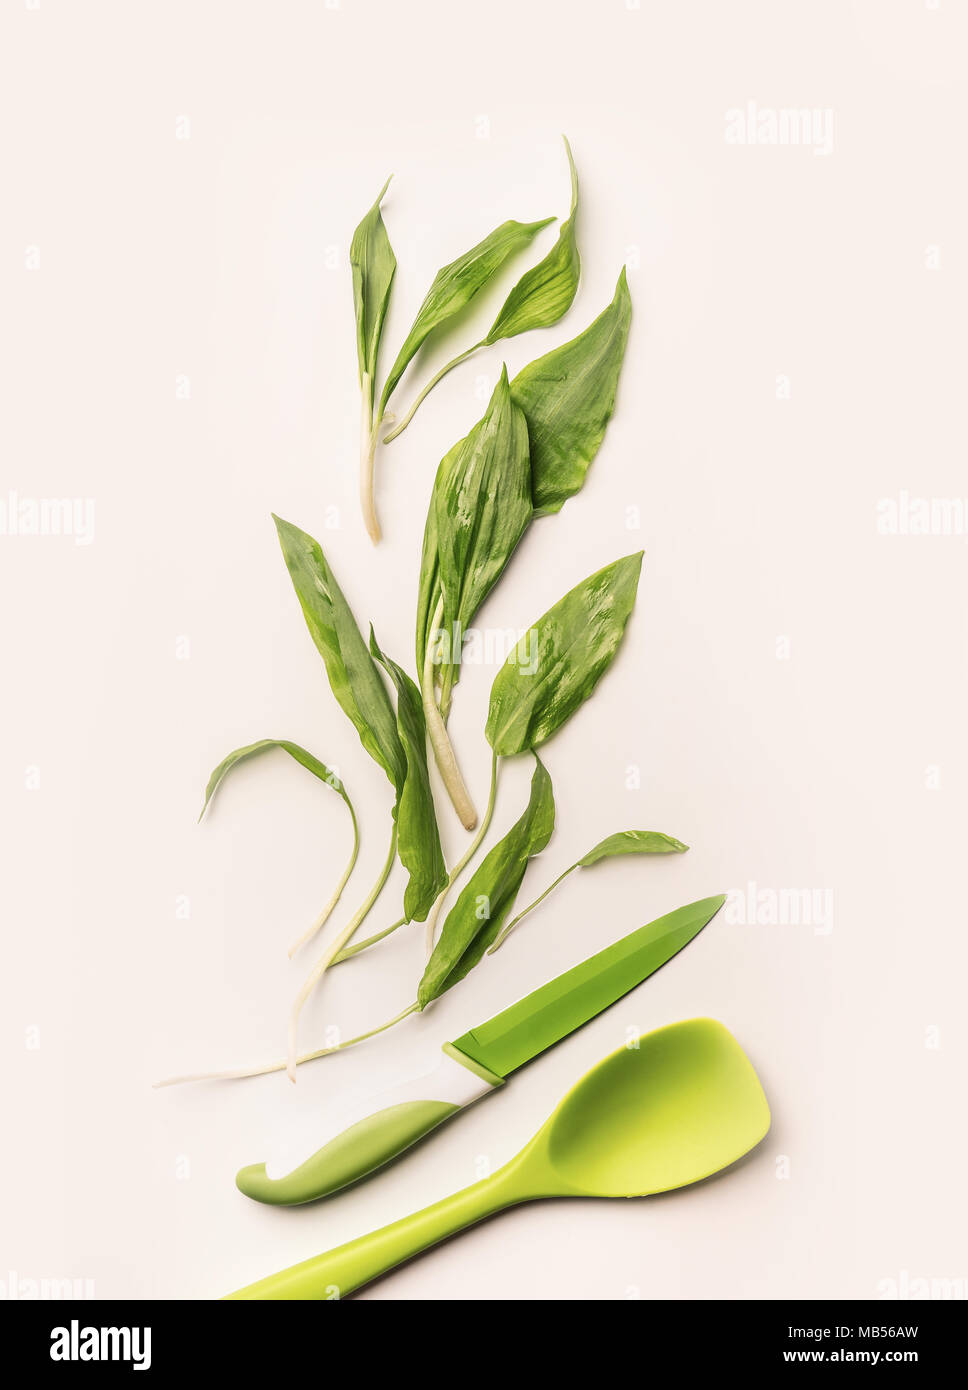 Creative layout with fresh green wild garlic leaves , knife and cooking spoon on white background.  Healthy seasonal food, recipes and eating concept Stock Photo